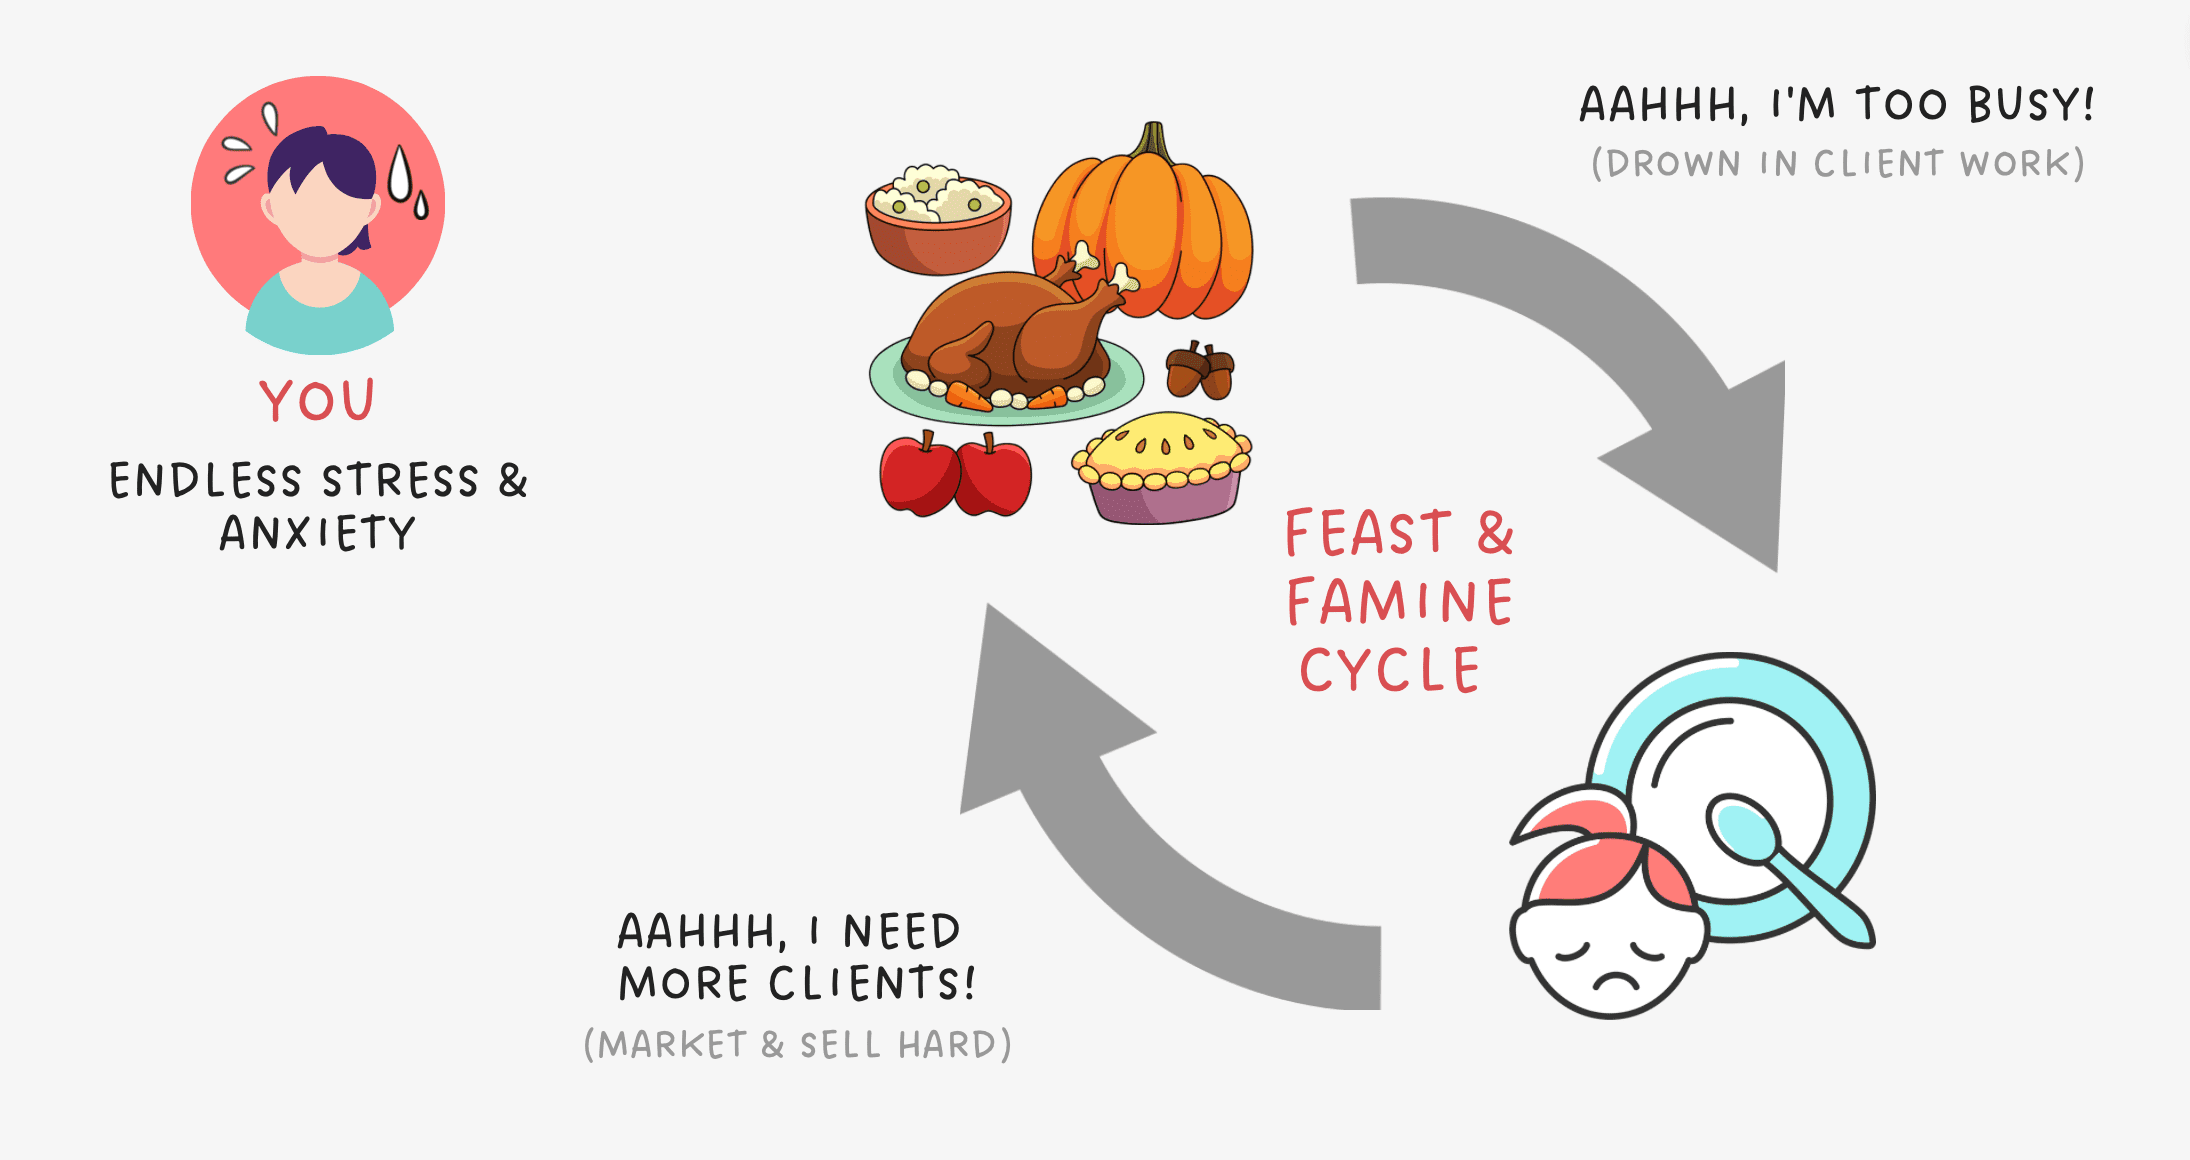 Level 1 - Feast & Famine Cycle